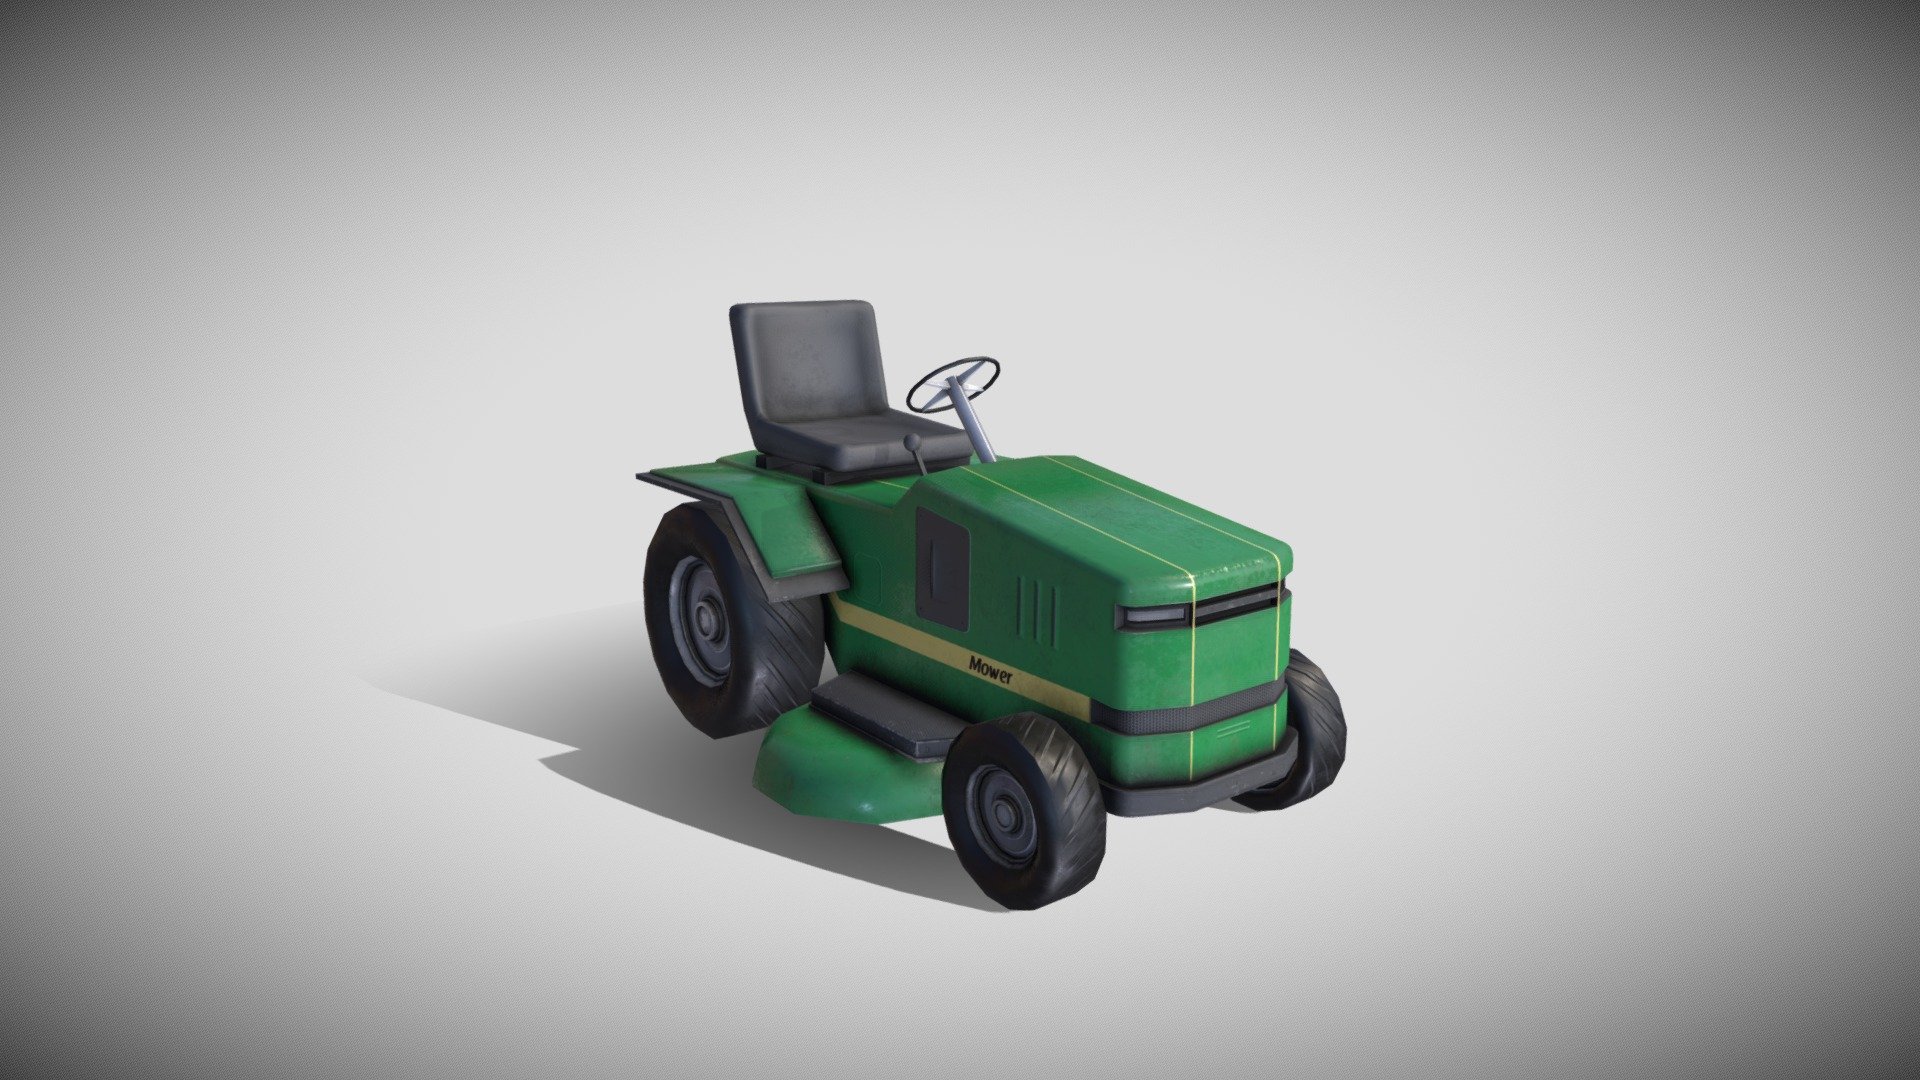 Mower-tractor model. 
Game-ready. Low-poly with PBR materials ( Albedo, Metallic+Roughness+AO, Normal map)
Email: yrayushka@yahoo.com
WEB: https://gest.lt/ - Mower-tractor | Game Ready - Buy Royalty Free 3D model by Gest.lt (@gestLT) 3d model